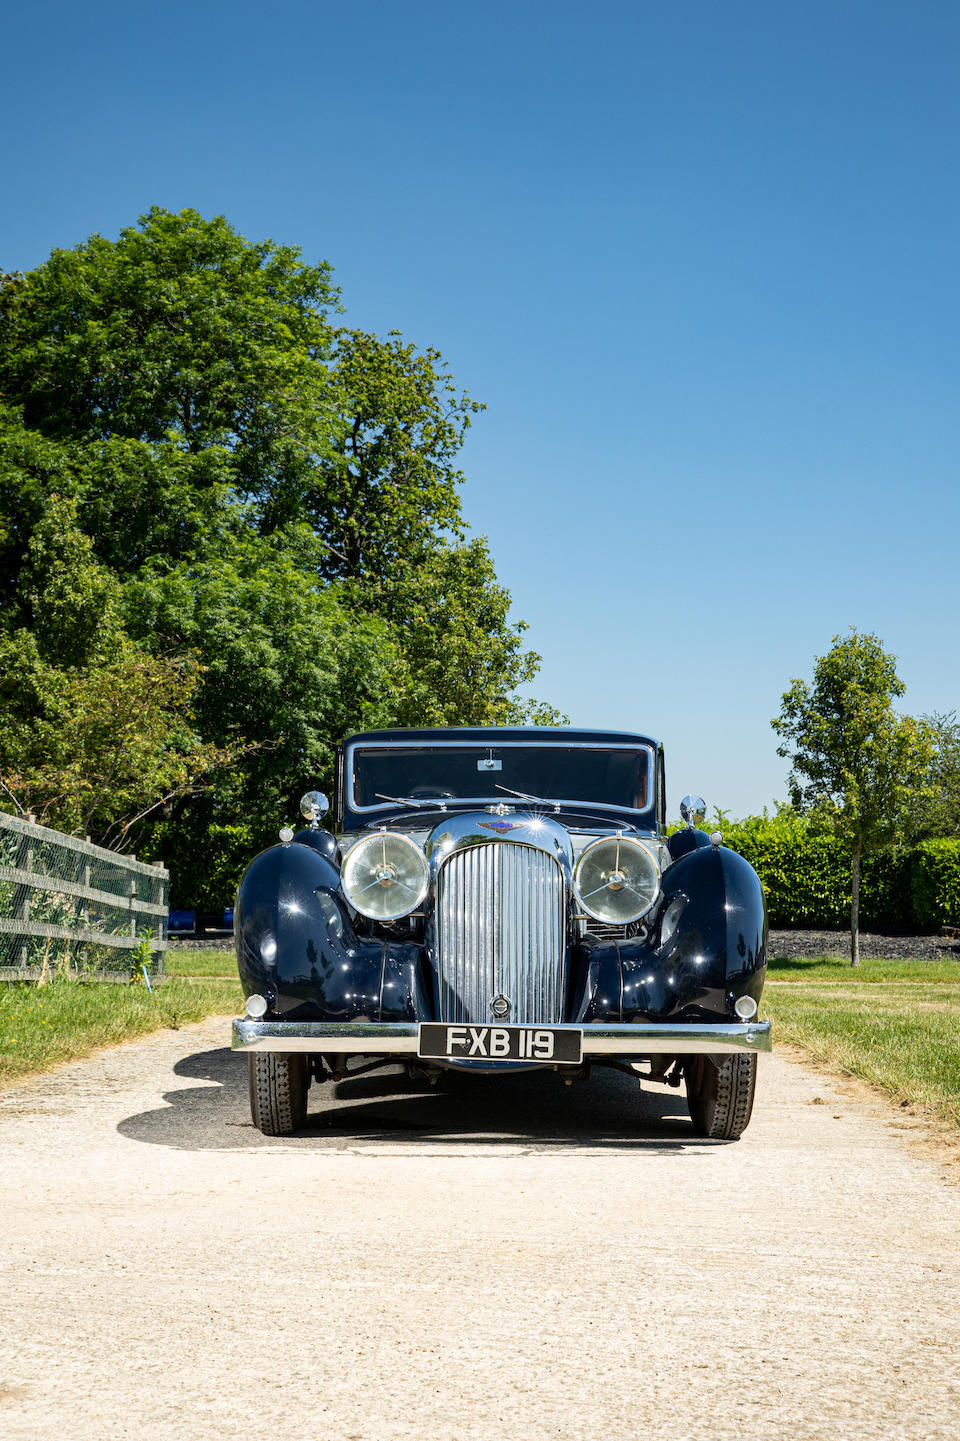 The Stan West Collection,1939 Lagonda V12 Sports Saloon